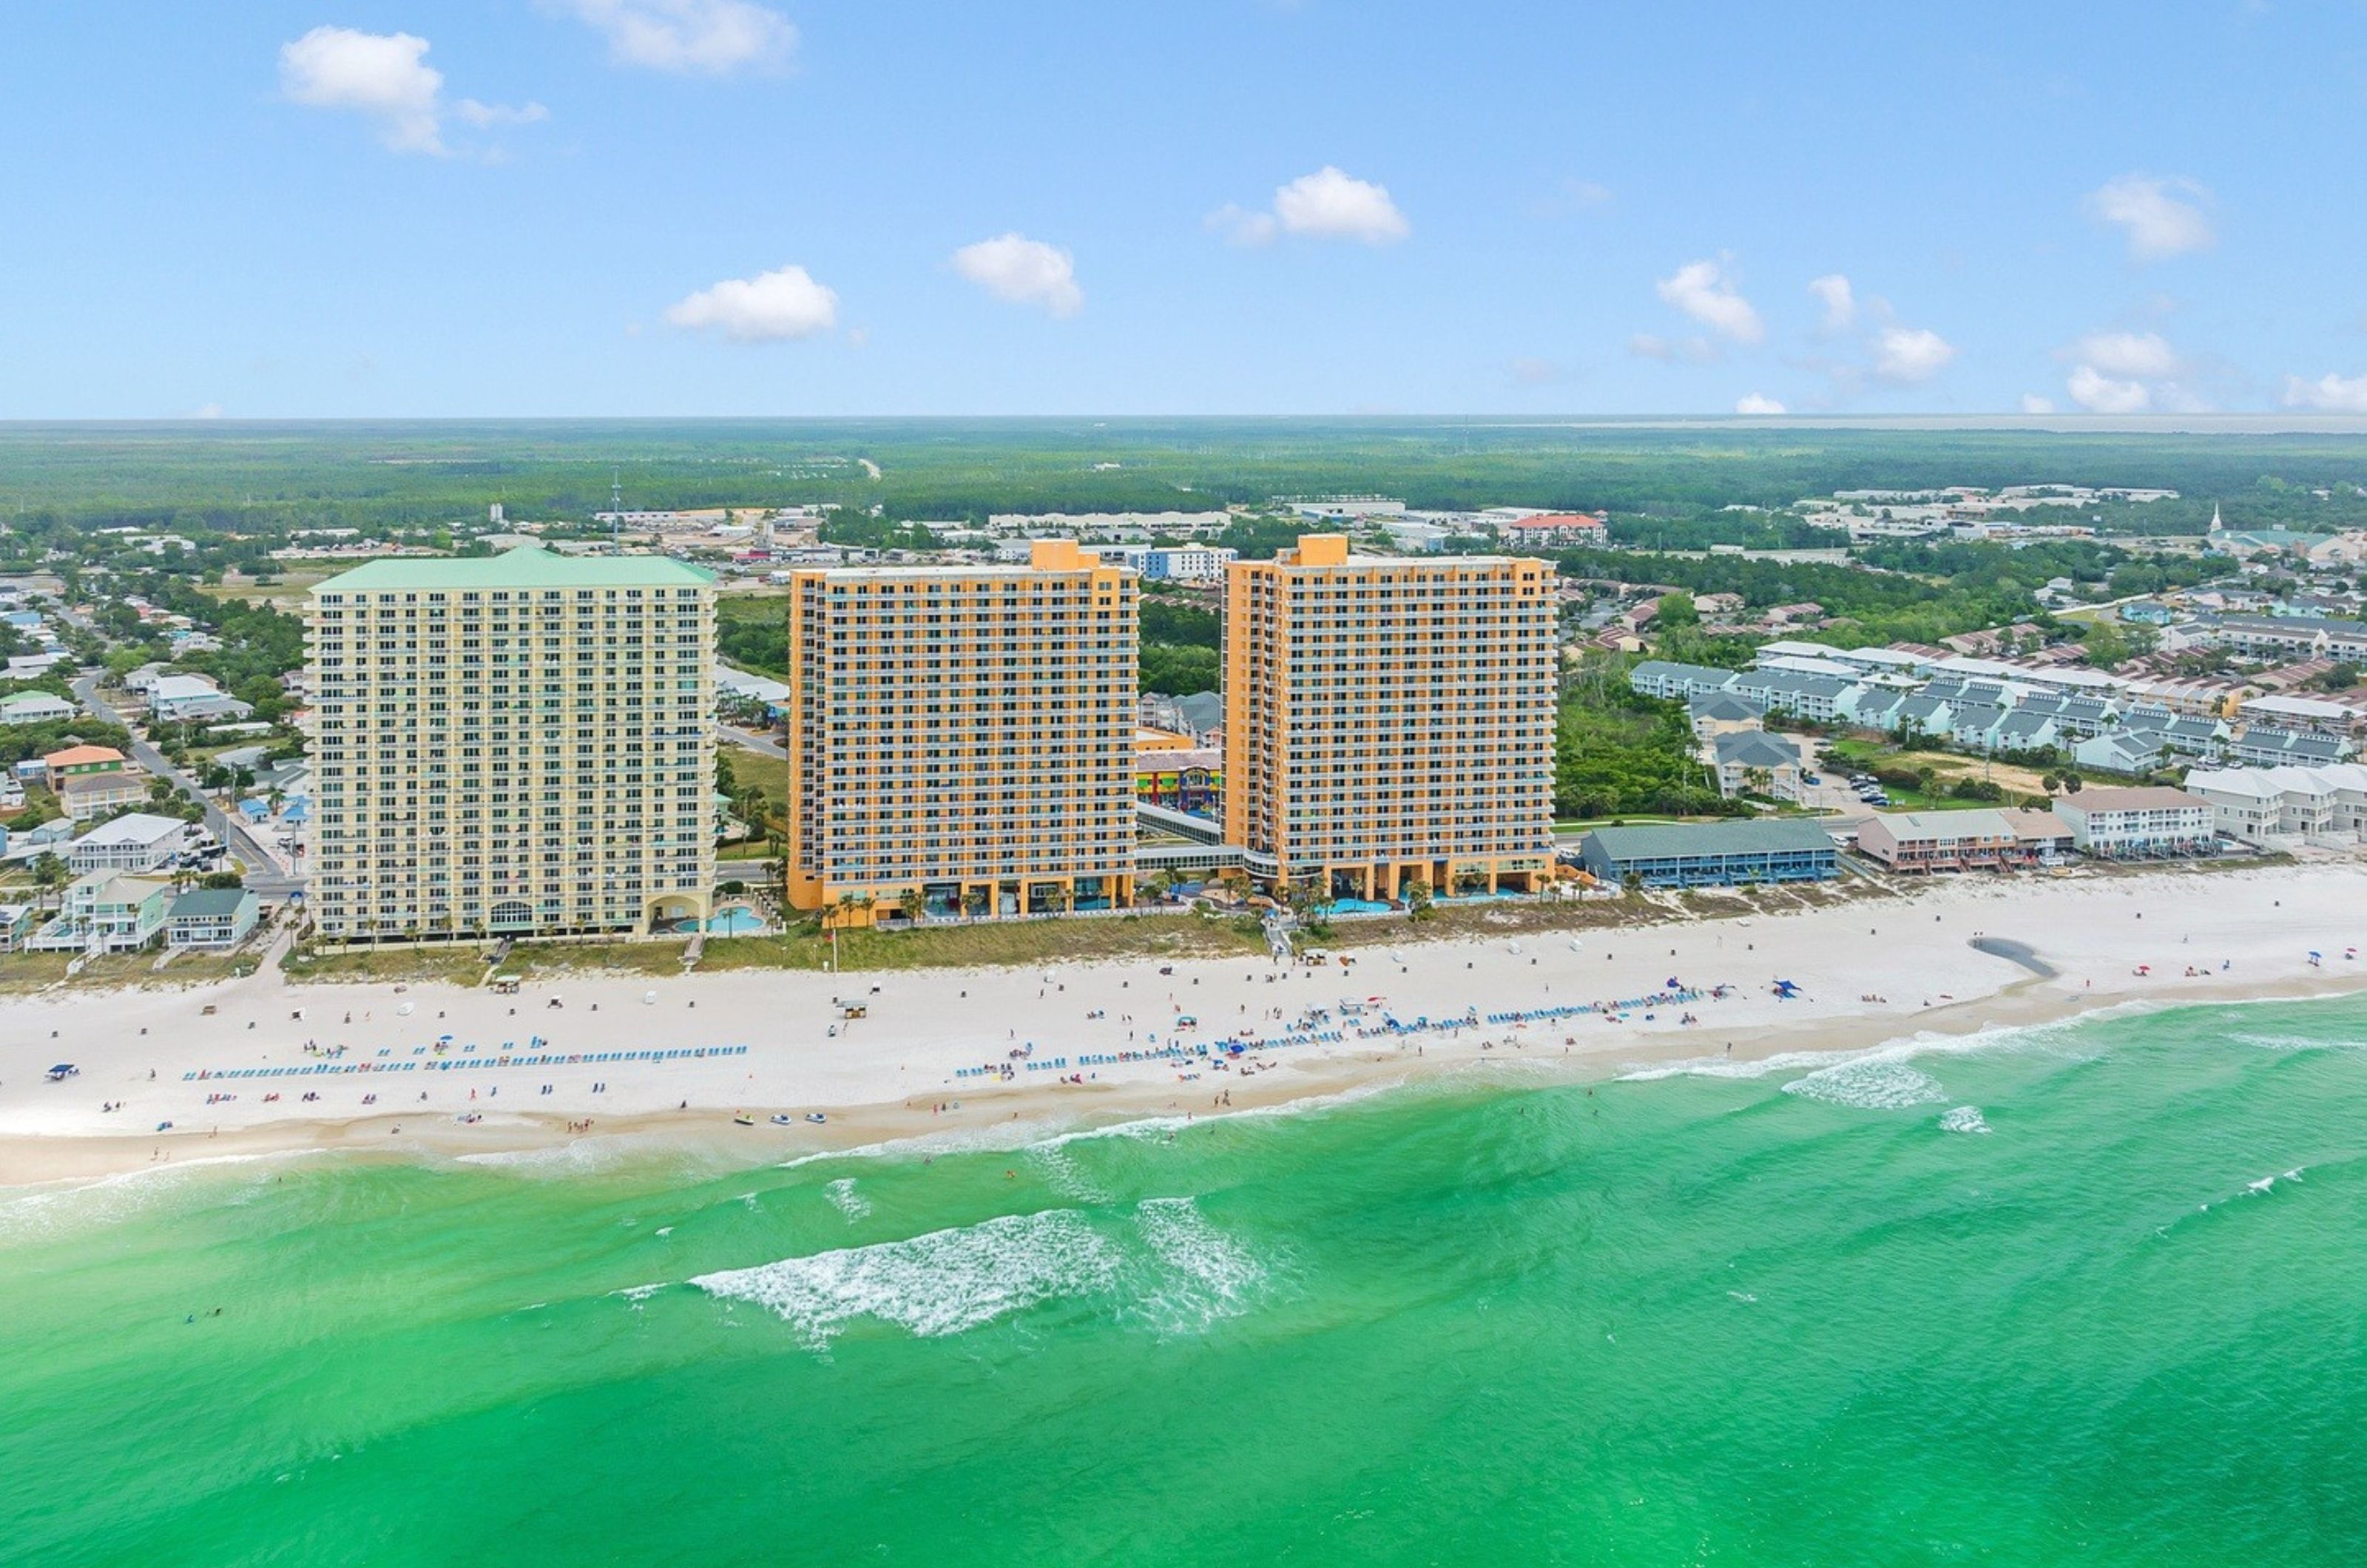 Birds eye view from the Gulf of the two towers at Splash Resort on the beach 